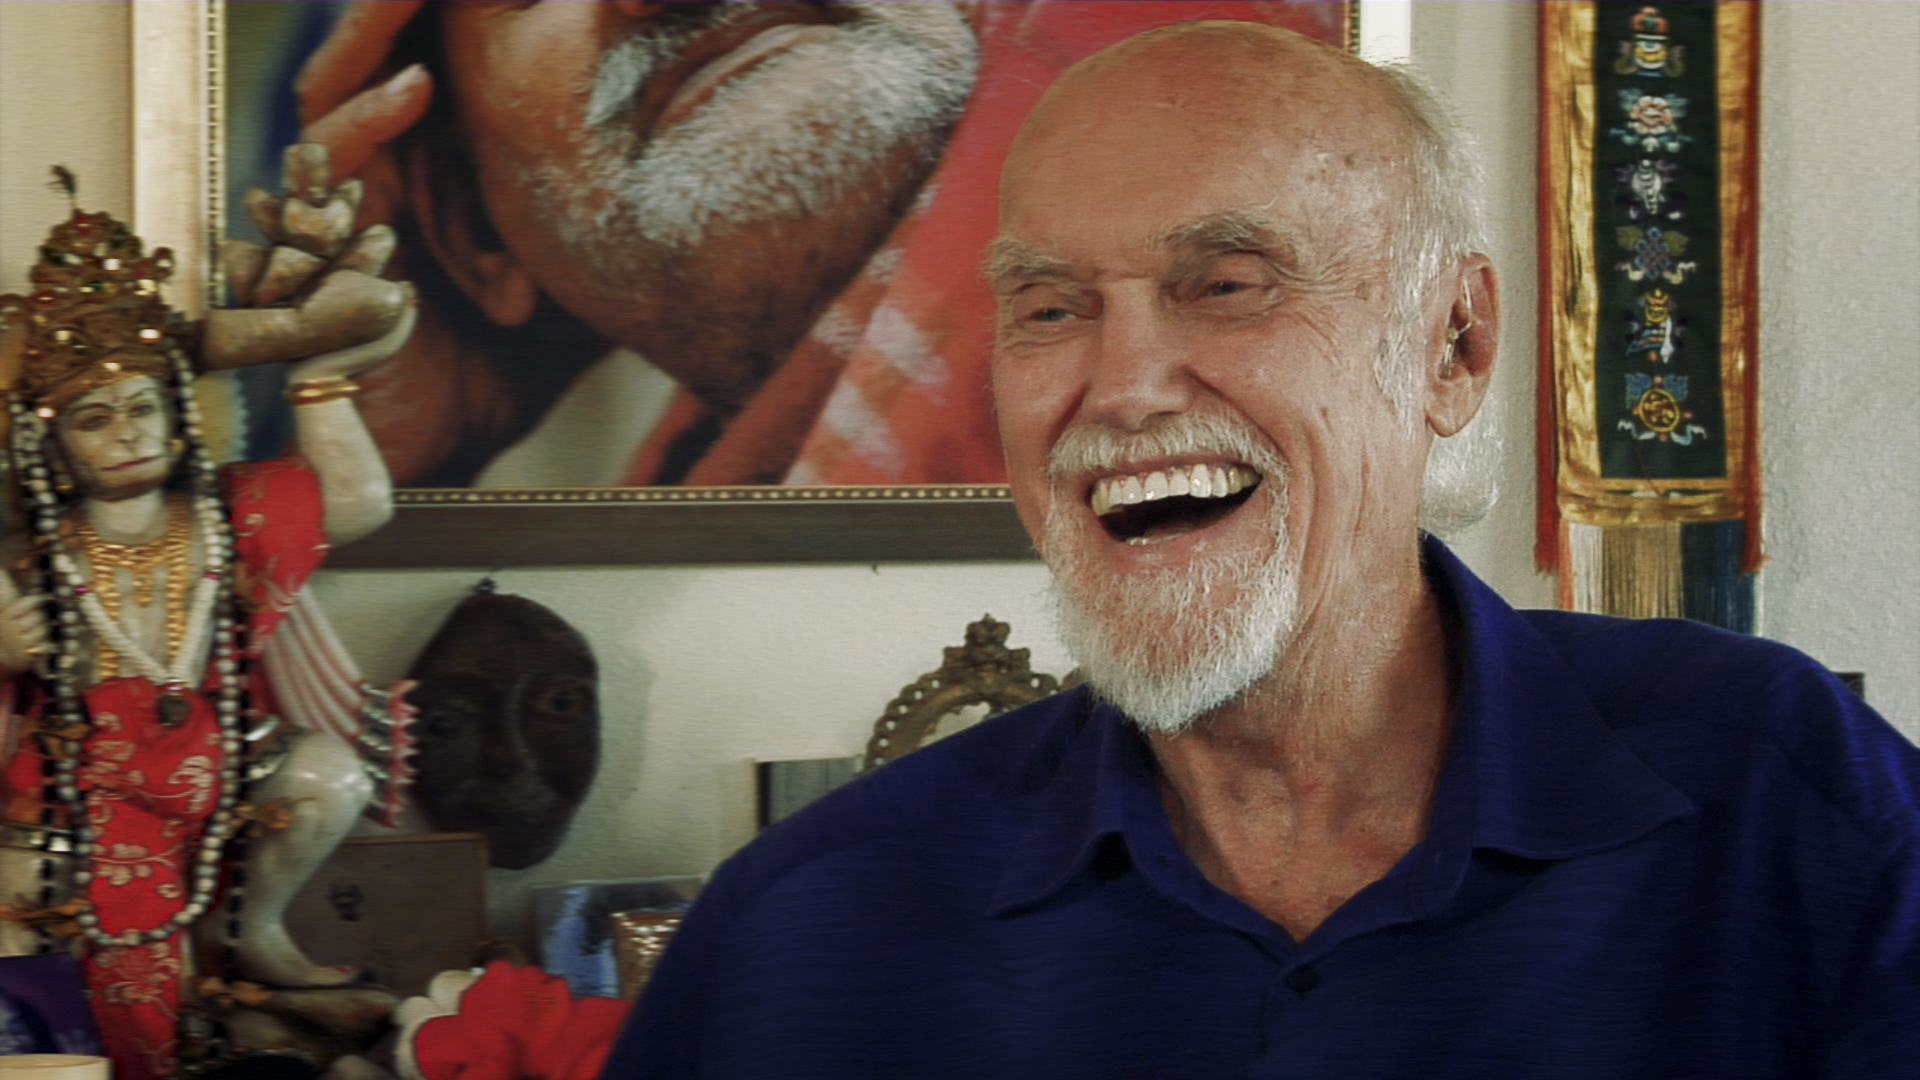 Ram Dass in a still from the upcoming documentary &#039;Becoming Nobody&#039; by Jamie Catto